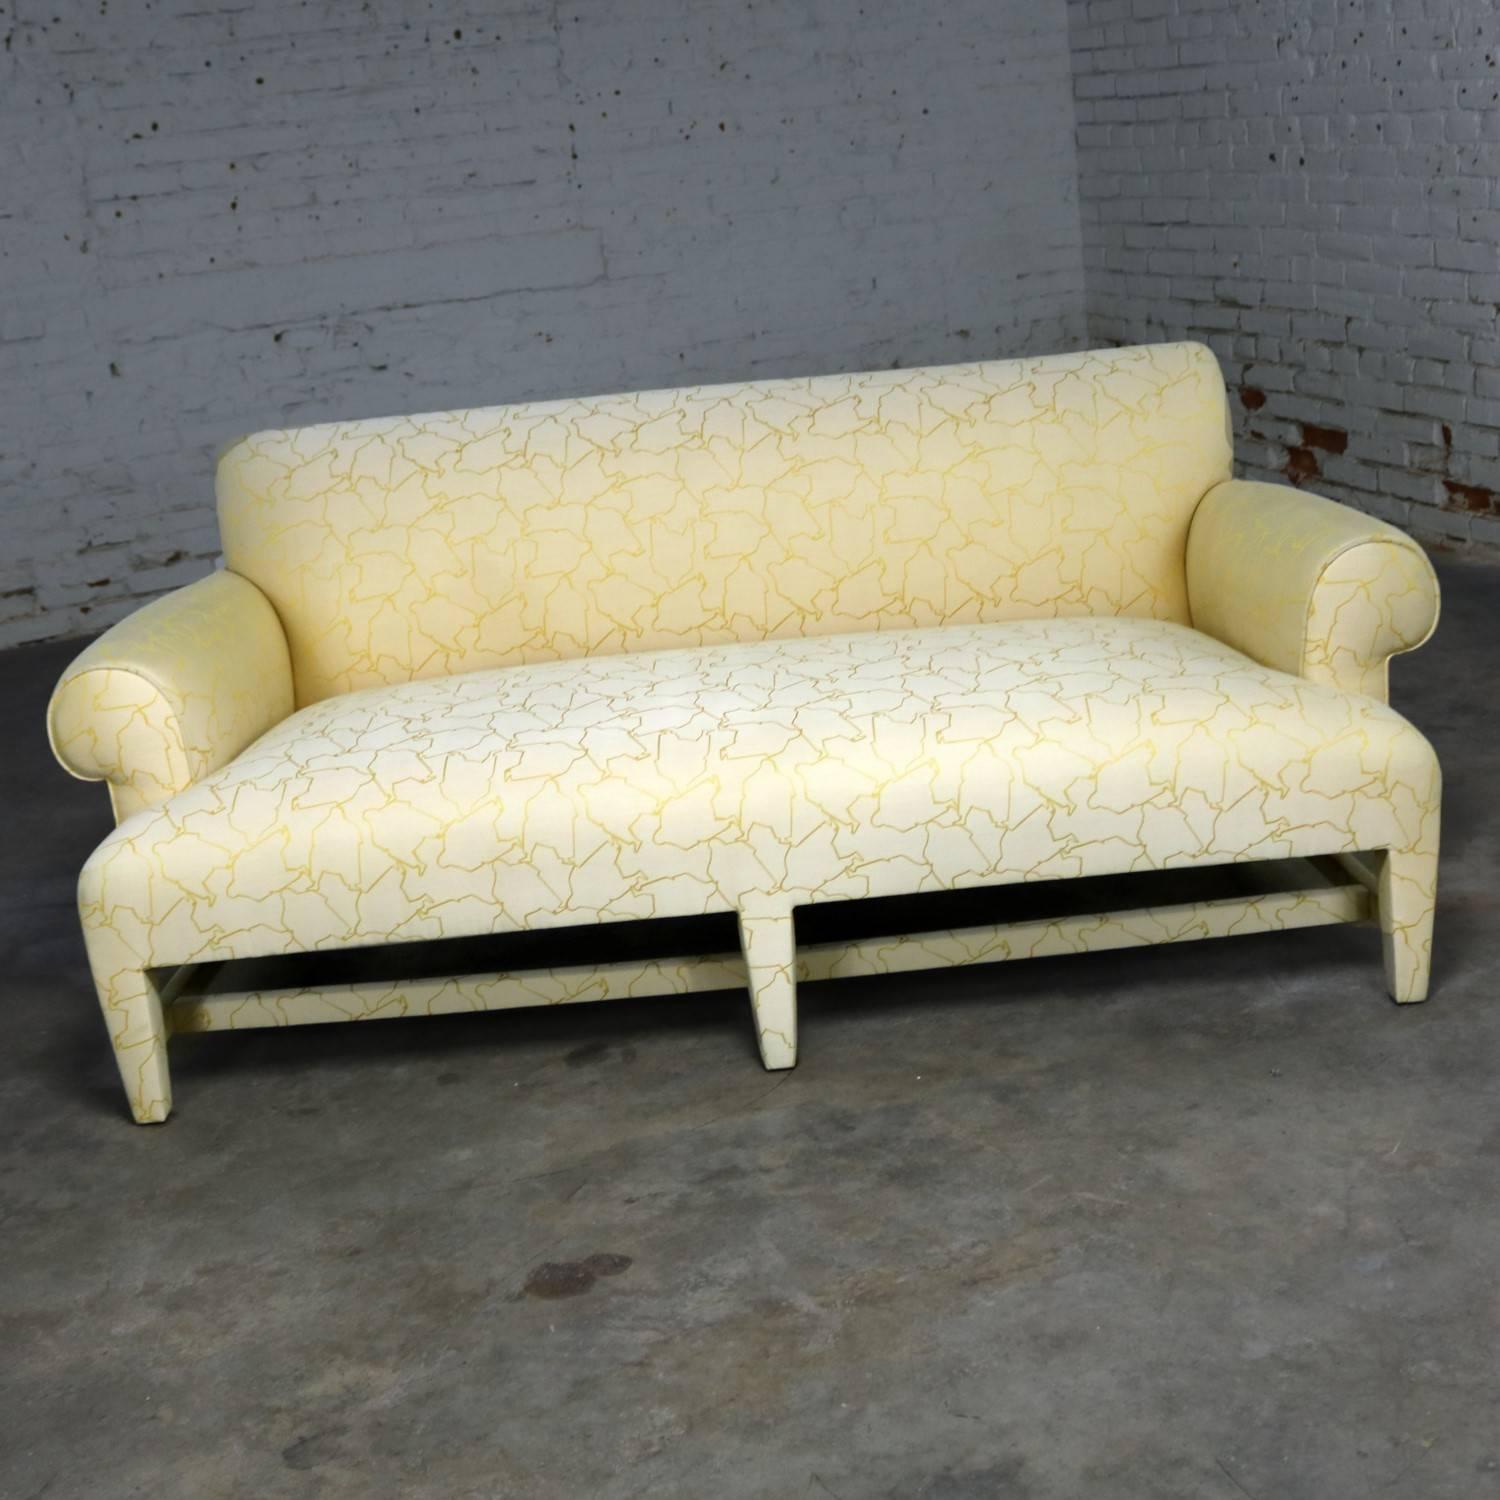 Extraordinary fully upholstered loveseat sized sofa by Donghia with design attributed to Angelo Donghia, circa 1980s. It retains its original label and original upholstery of cream and yellow with a fat man motif. It is unknown if this is a Donghia